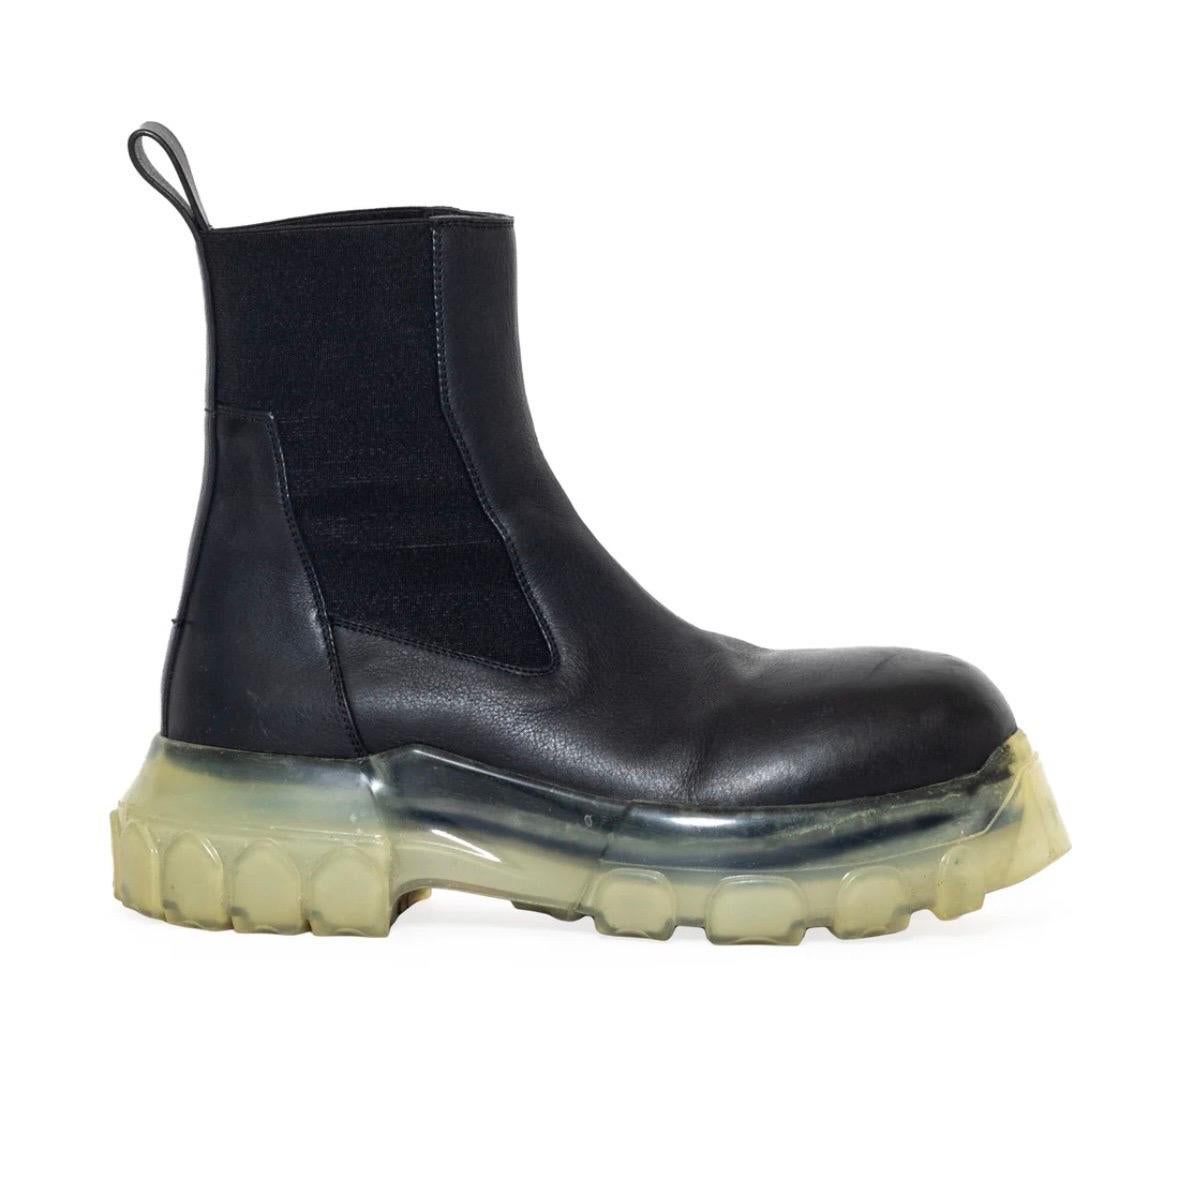 Rick Owens Black and Transparent Beatle Bozo Tractor Boots Size 38 (Spring 2021) For Sale 2